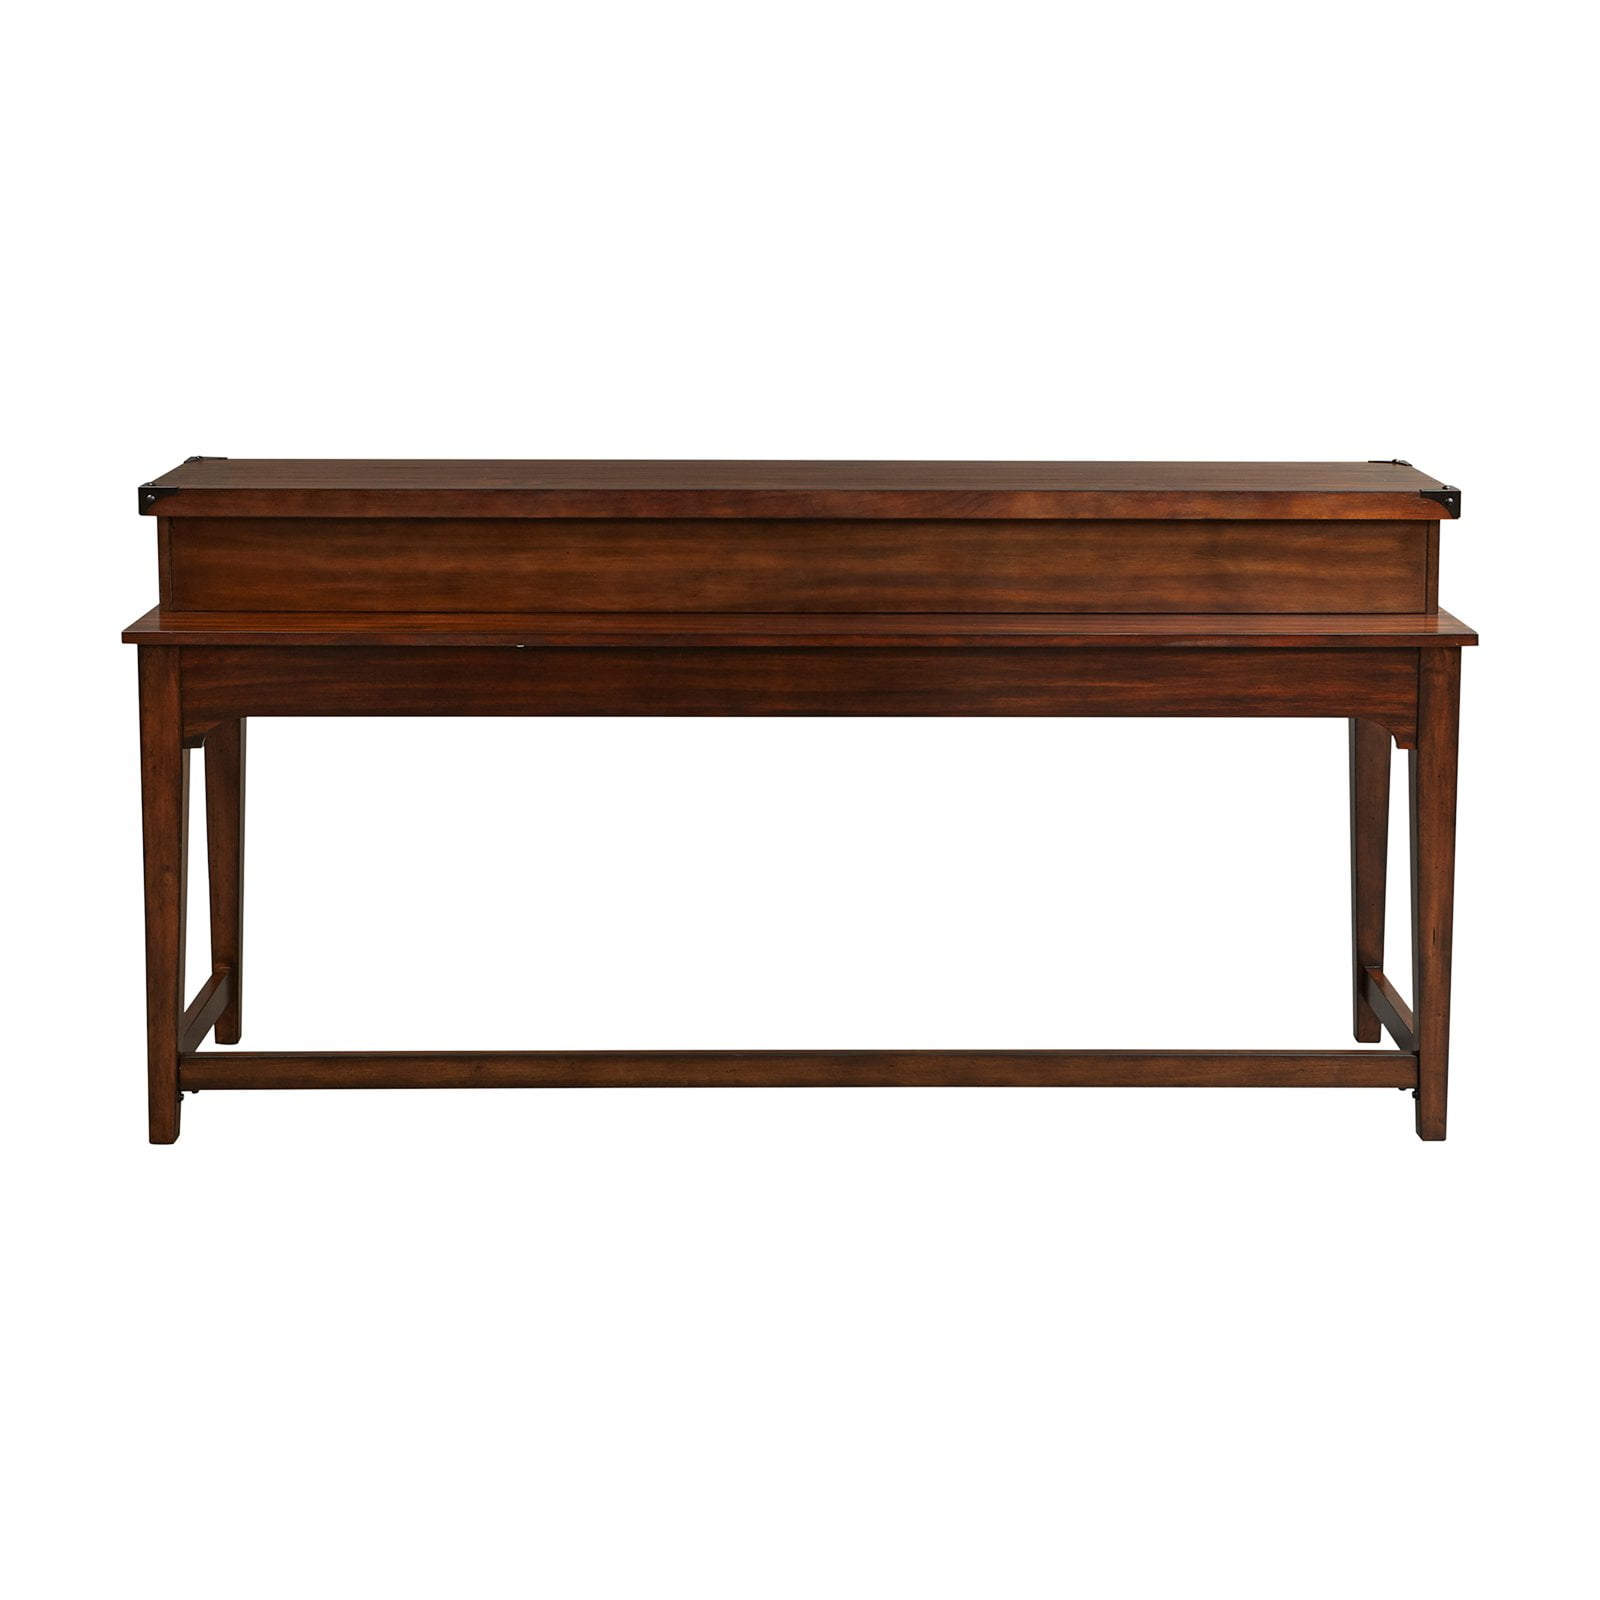 Sandstone Liberty Furniture Industries Sun Valley Console Bar Table W74 x D21 x H36